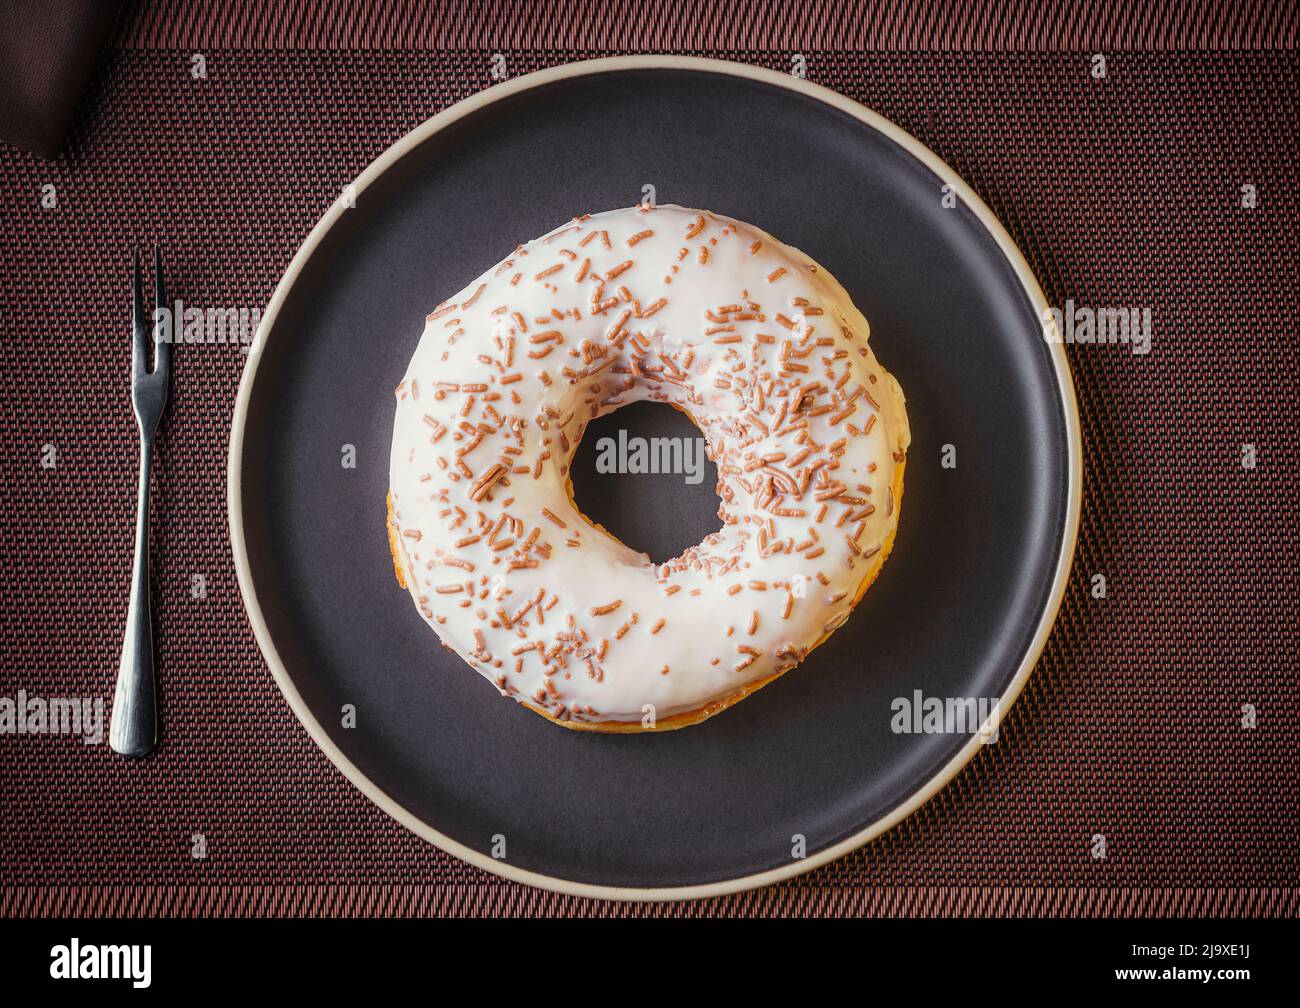 Tasty donut isolated on a plate on a fine table. Donuts, with white chocolate sprinkled with chocolate chips, Fine pastries Stock Photo